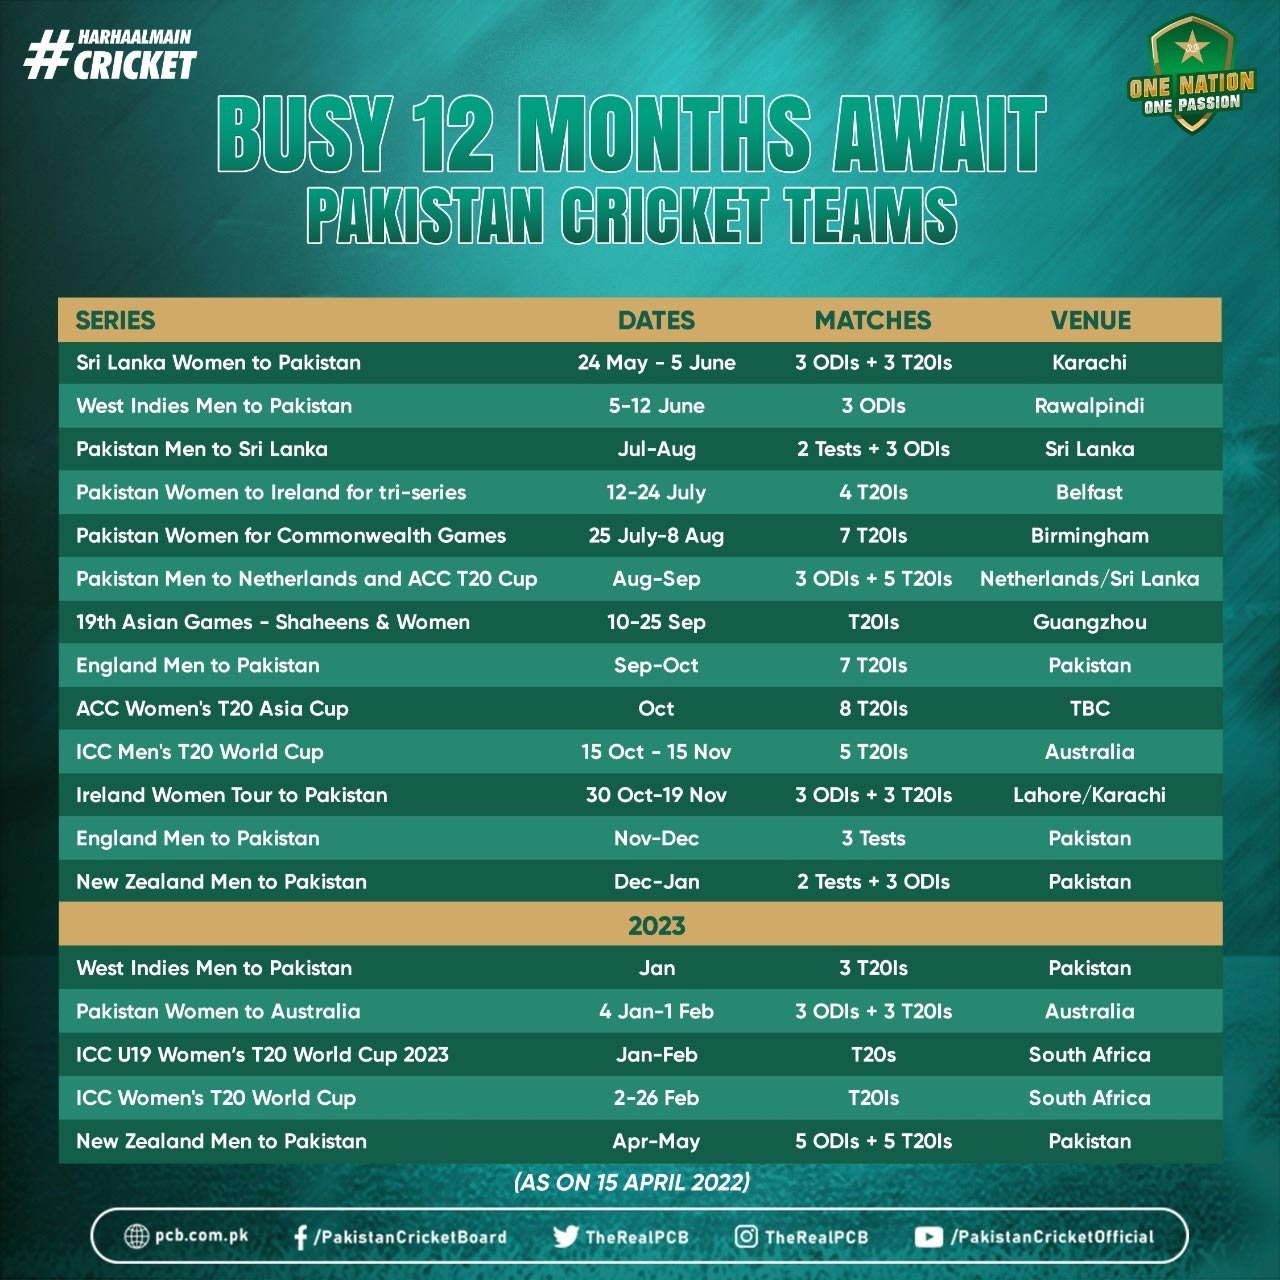 What is Pakistan cricket teams 12-month schedule?